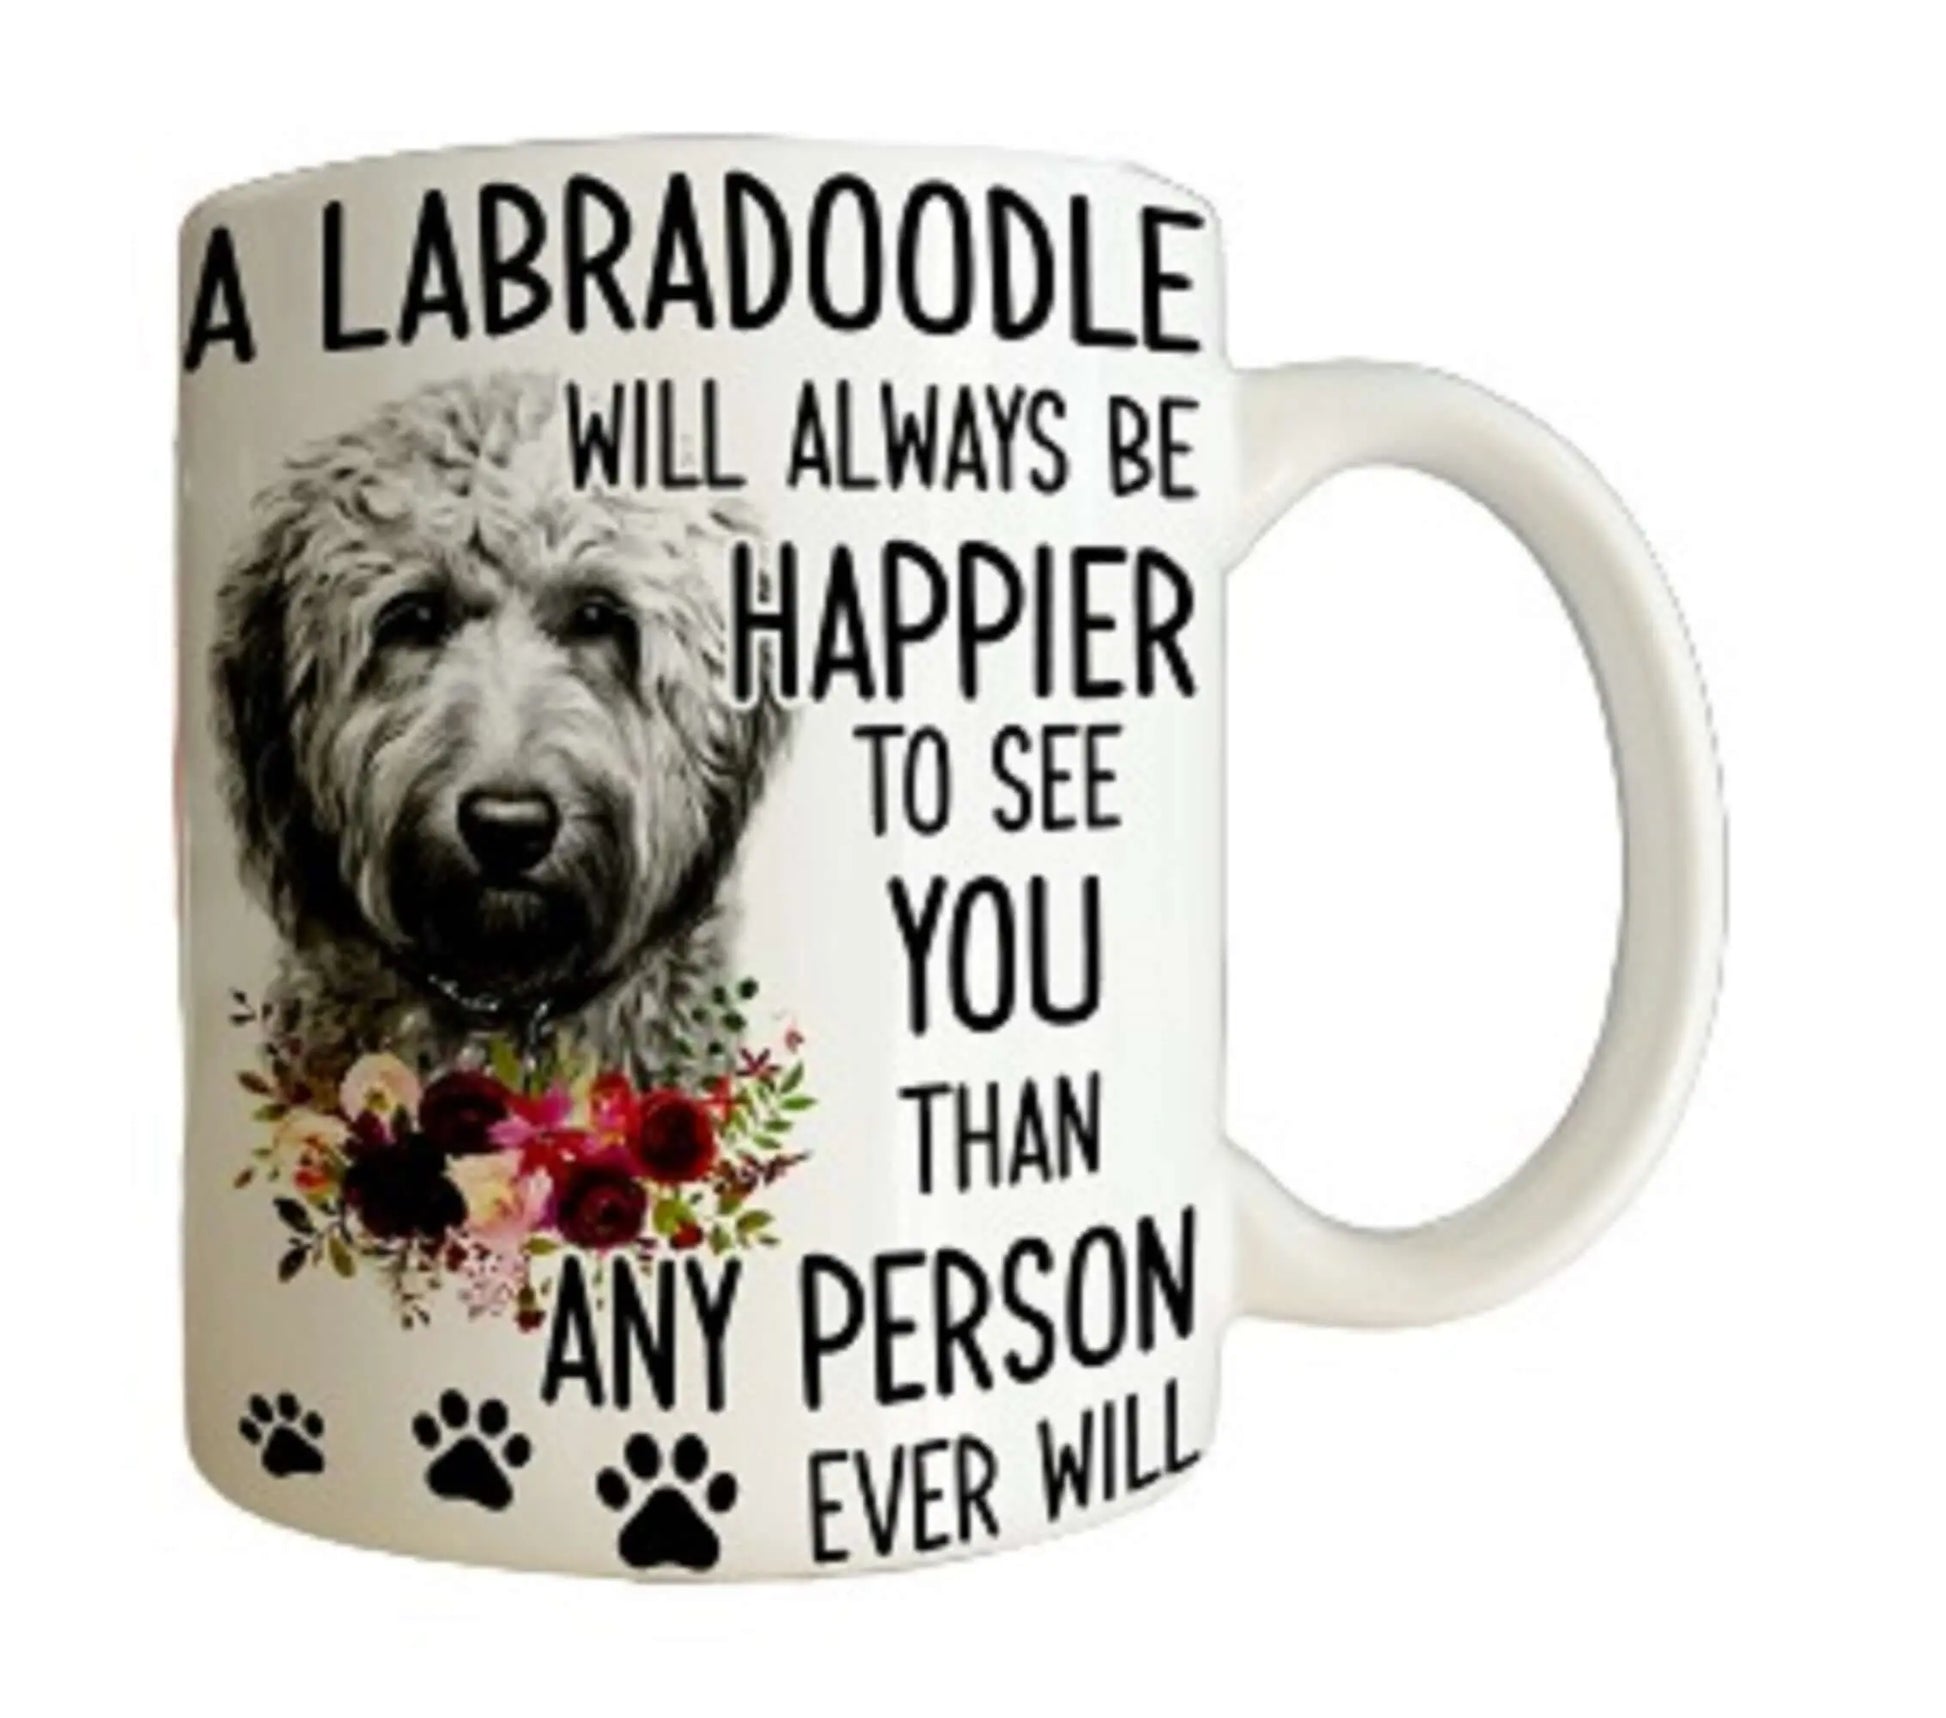  A Labradoodle Will Always Be Happier Mug by Free Spirit Accessories sold by Free Spirit Accessories